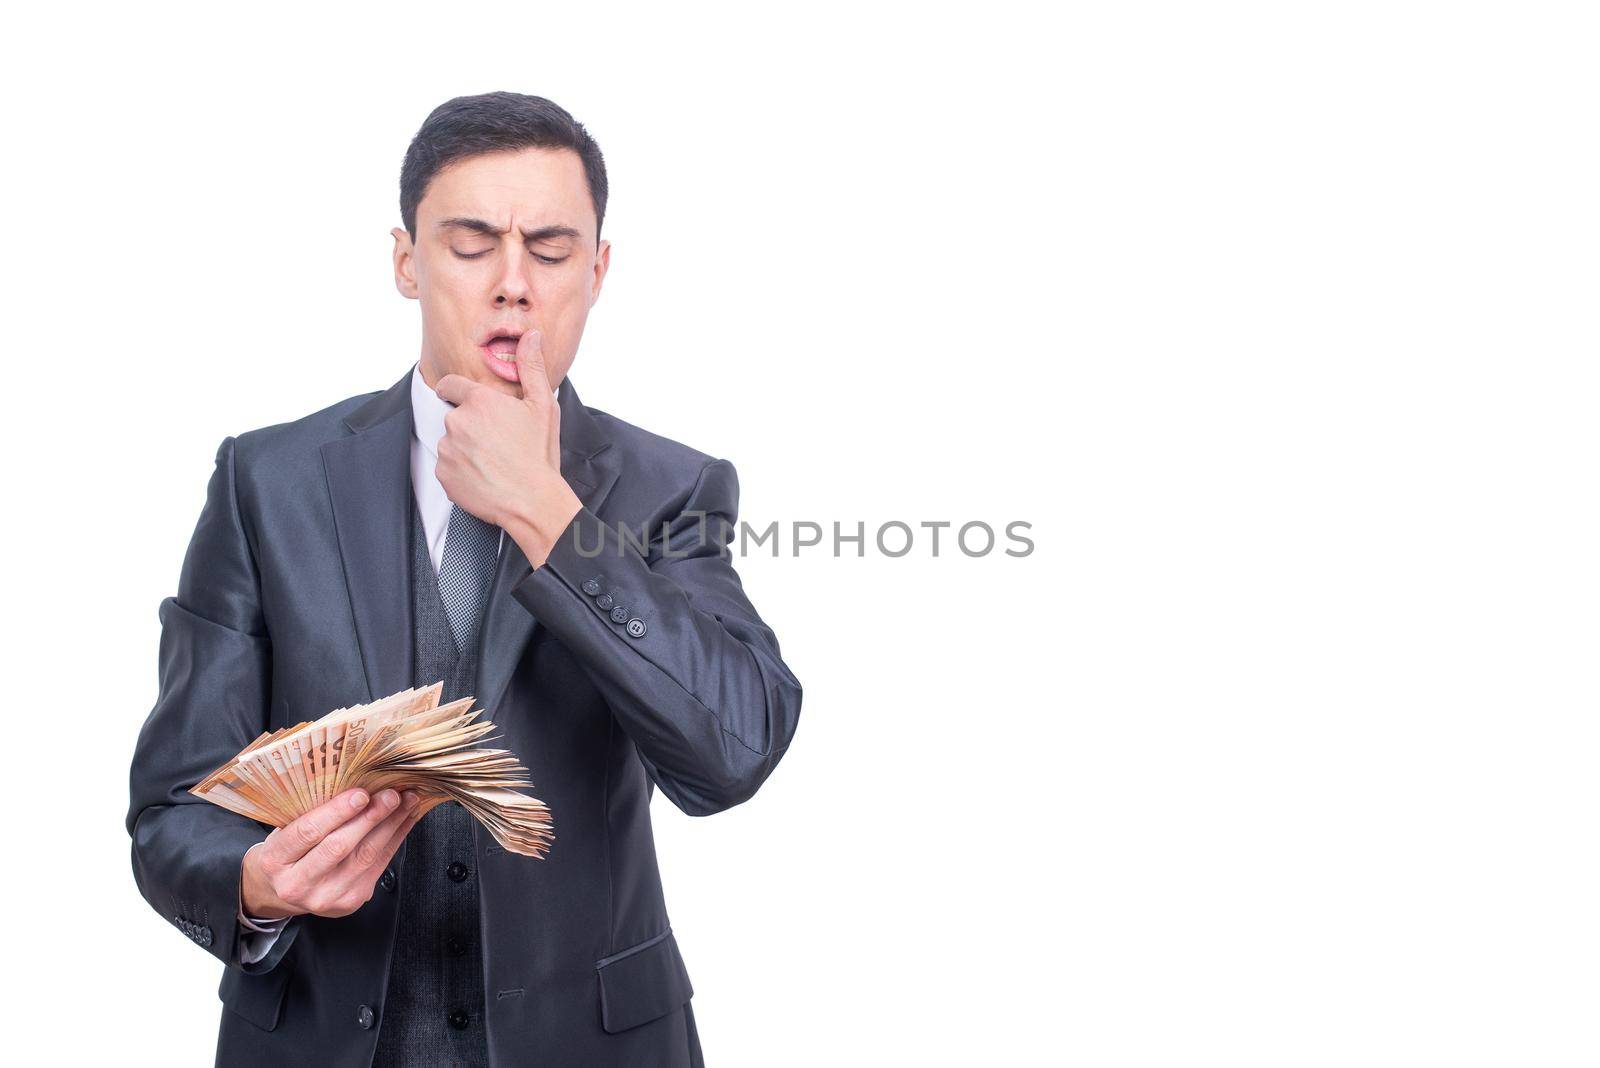 Successful millionaire male entrepreneur in elegant suit counting bunch of money while standing isolated on white background in light studio